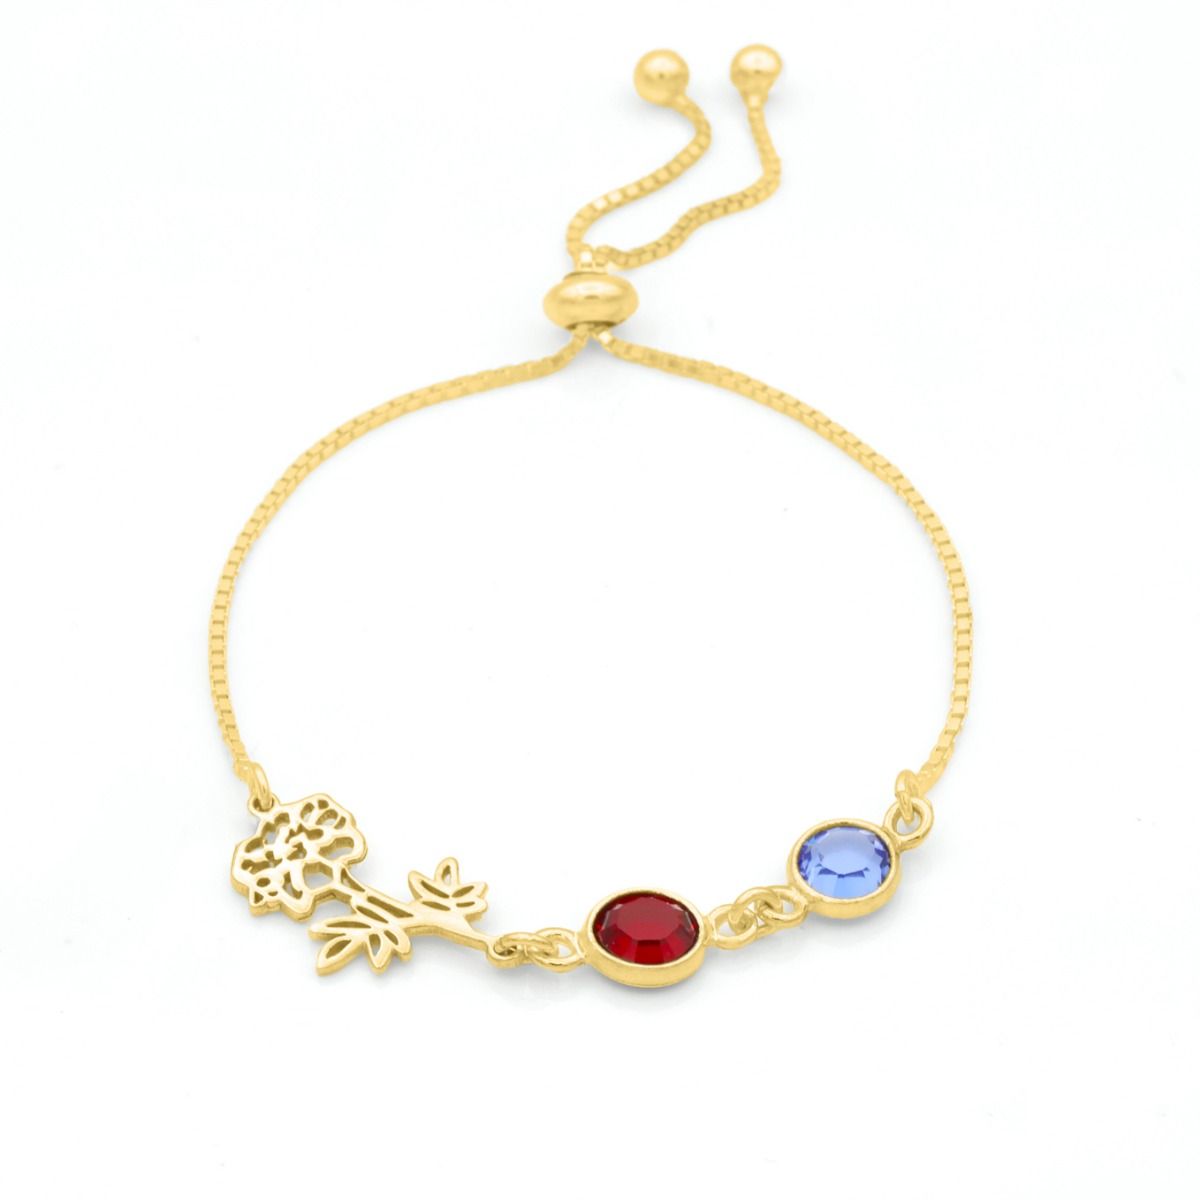 Talisa Stars Birthstone Bracelet (Red String) - Gifts Ideas for Mom by Talisa